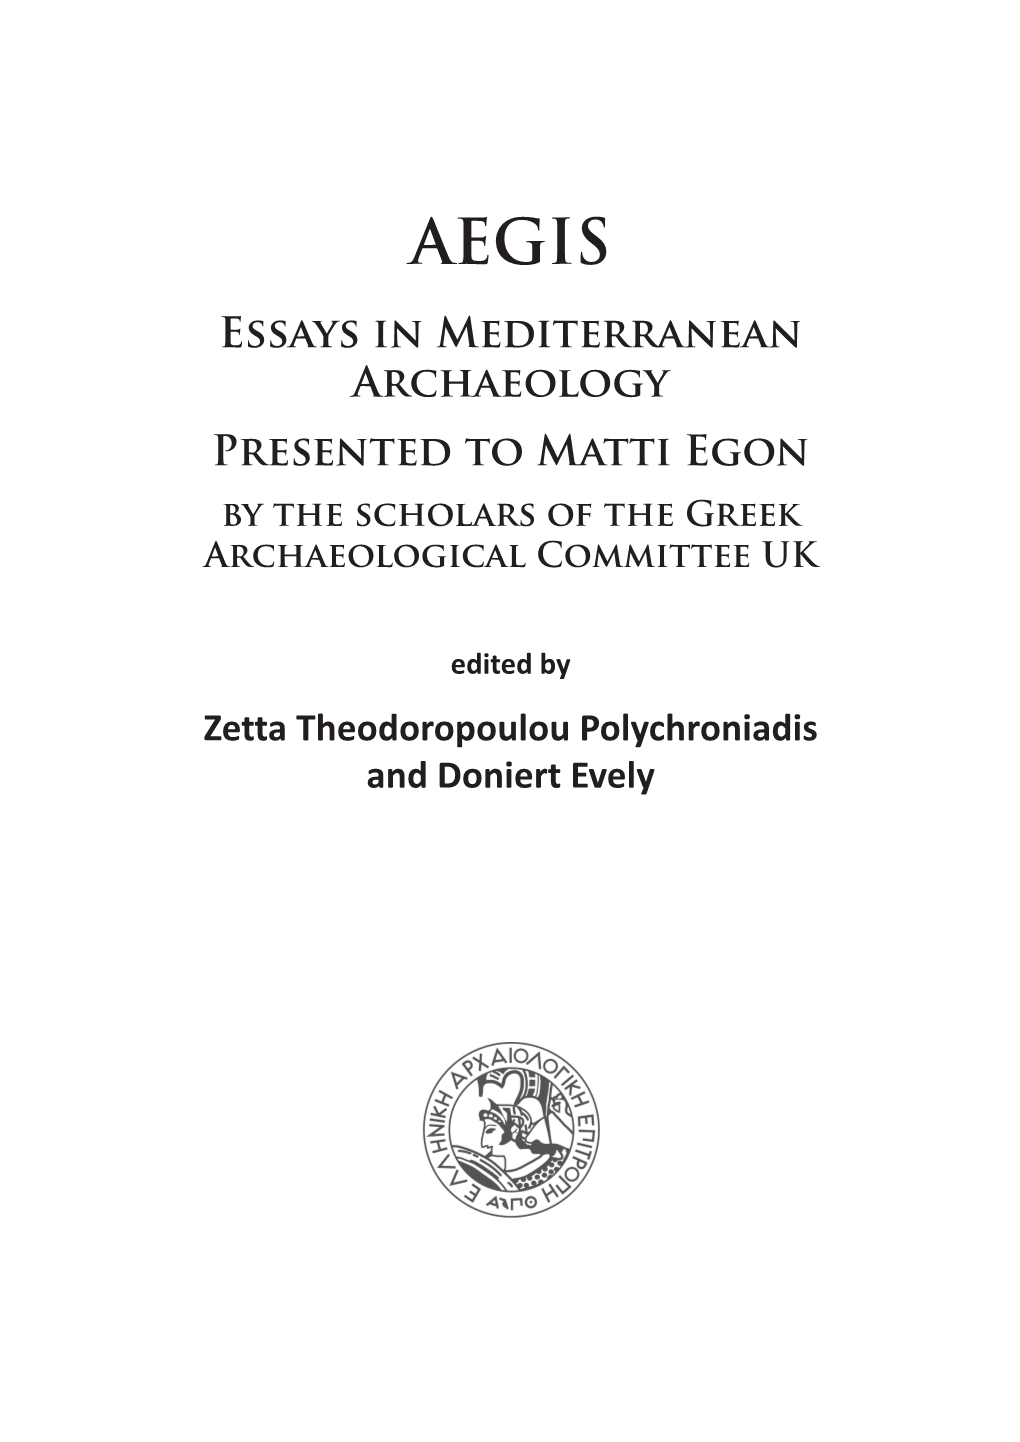 Essays in Mediterranean Archaeology Presented to Matti Egon by the Scholars of the Greek Archaeological Committee UK